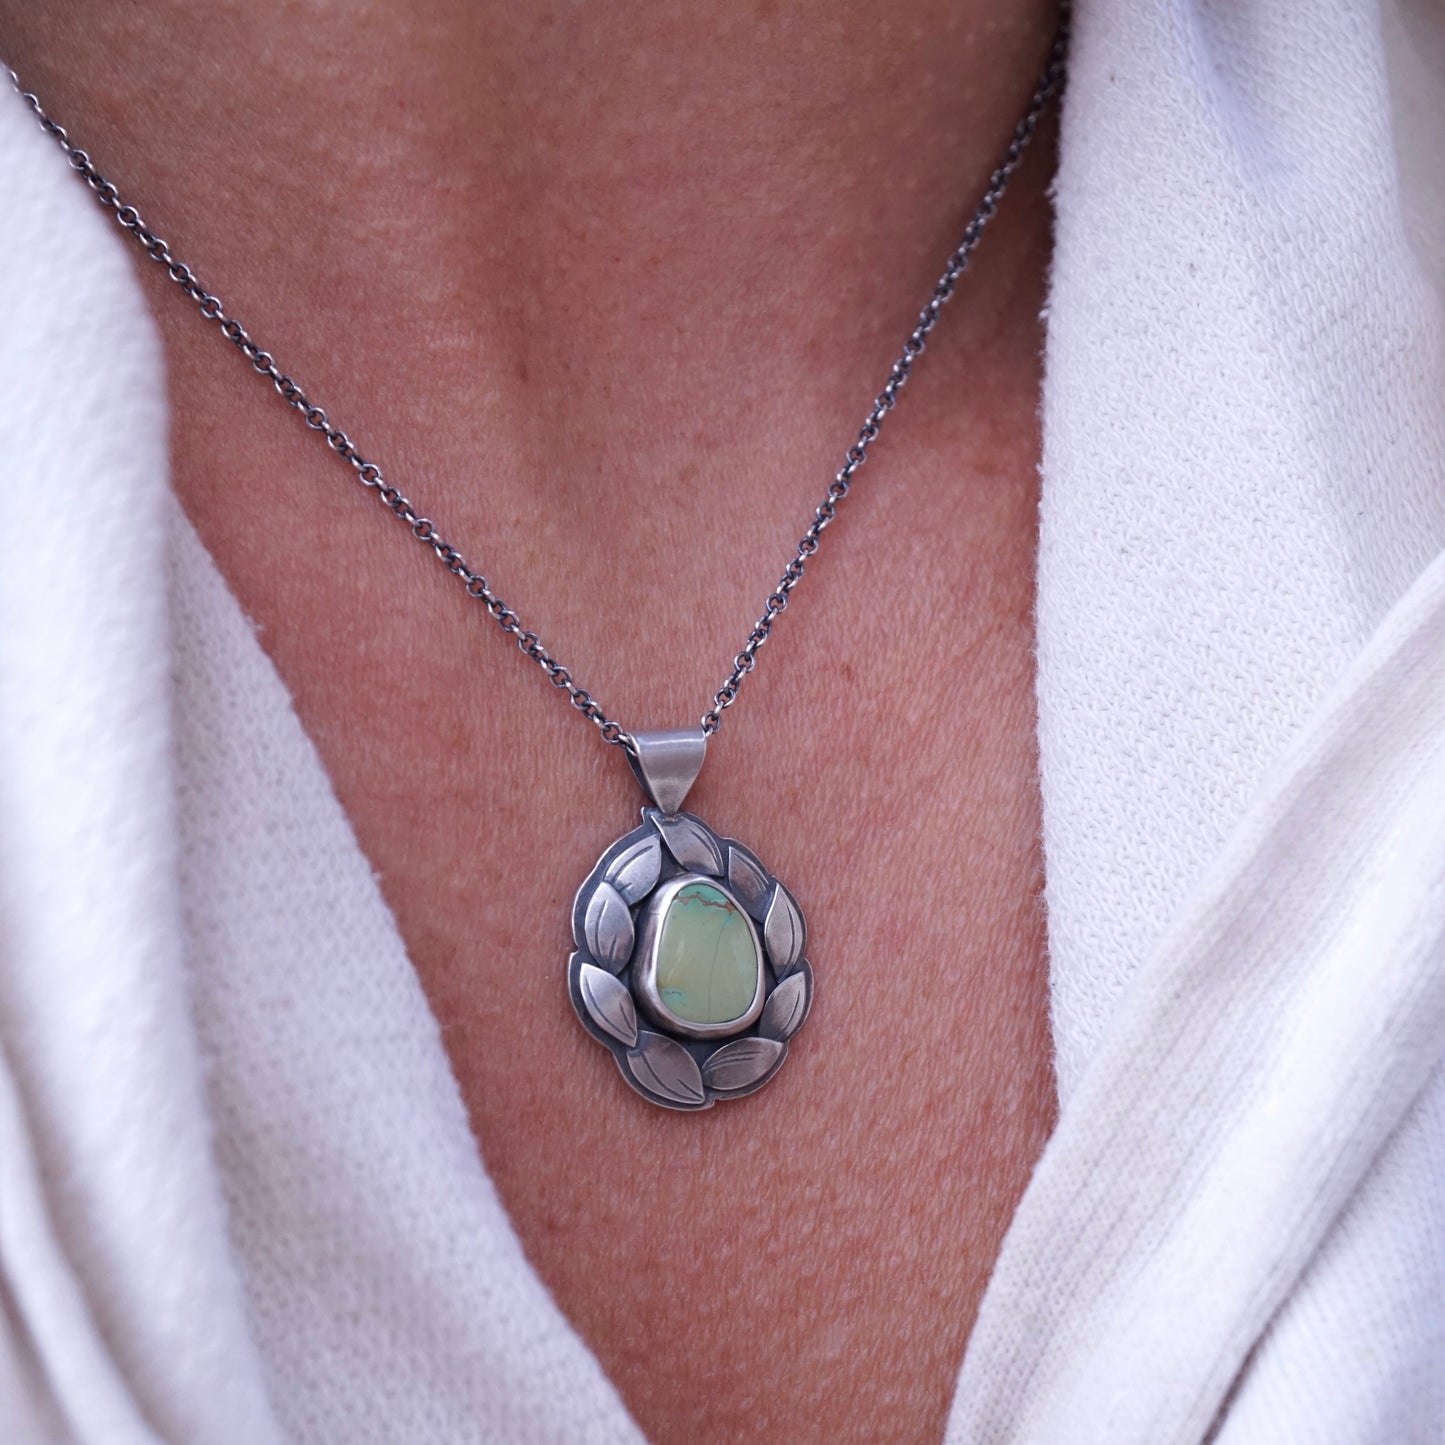 spring leaves necklace - reduced price for stone flaw - Lumenrose